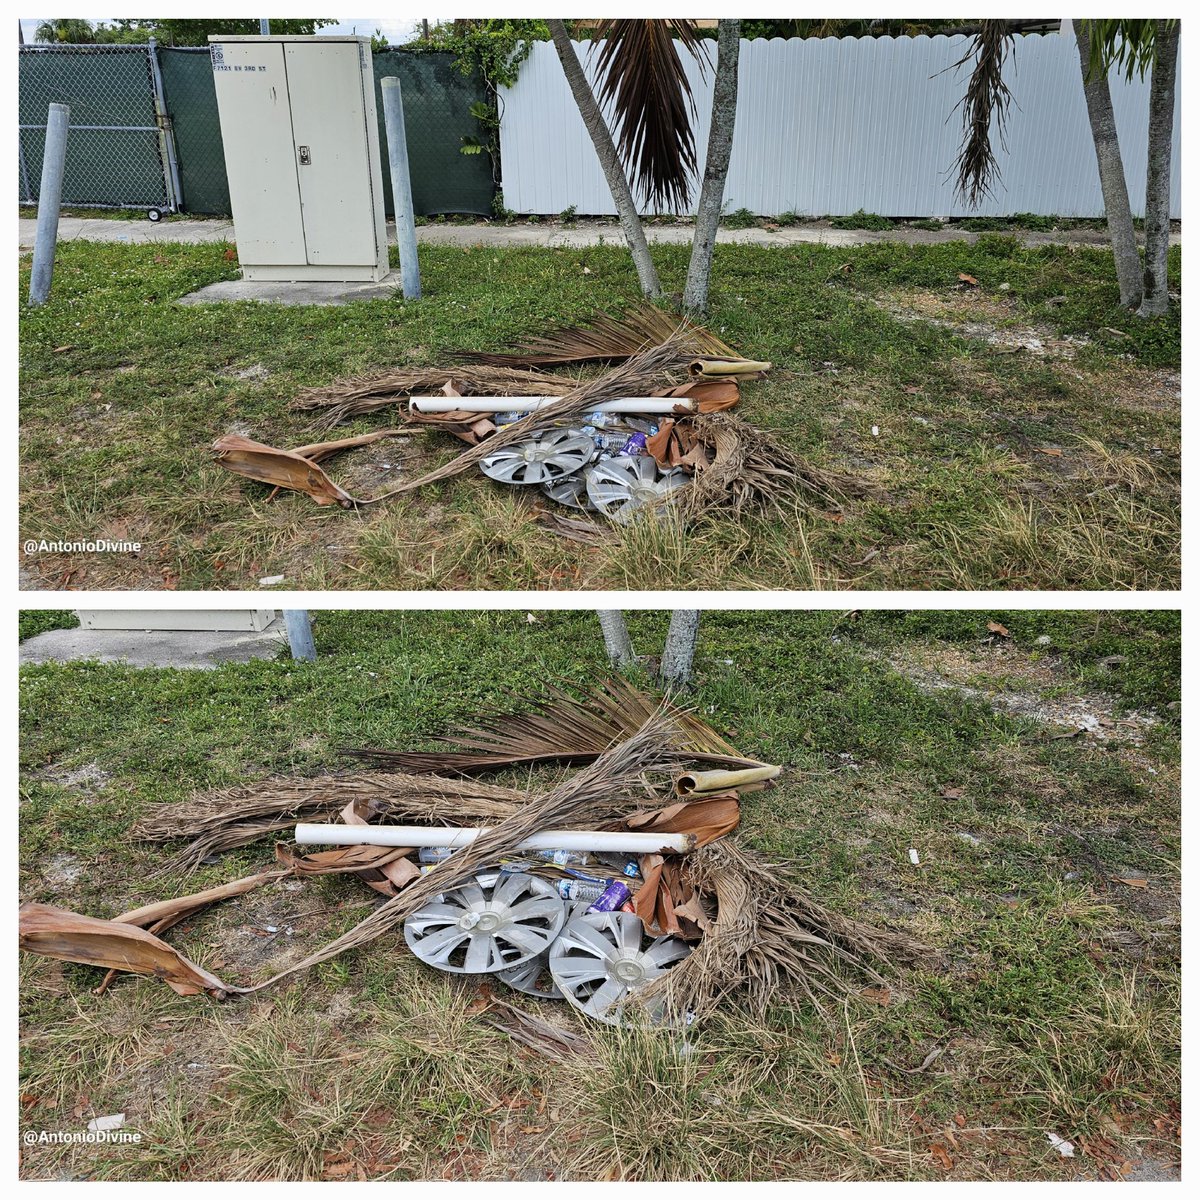 Every #Tuesday I take the time to clean up the corner of SW 71 Ave. & 3rd St. @CityofMiami, next to the Badia Center so the next day the @MiamiZeroWaste big trash truck can collect it. A neighbor asked me why I do it..simple I said, it is my neighborhood & I care to keep it clean